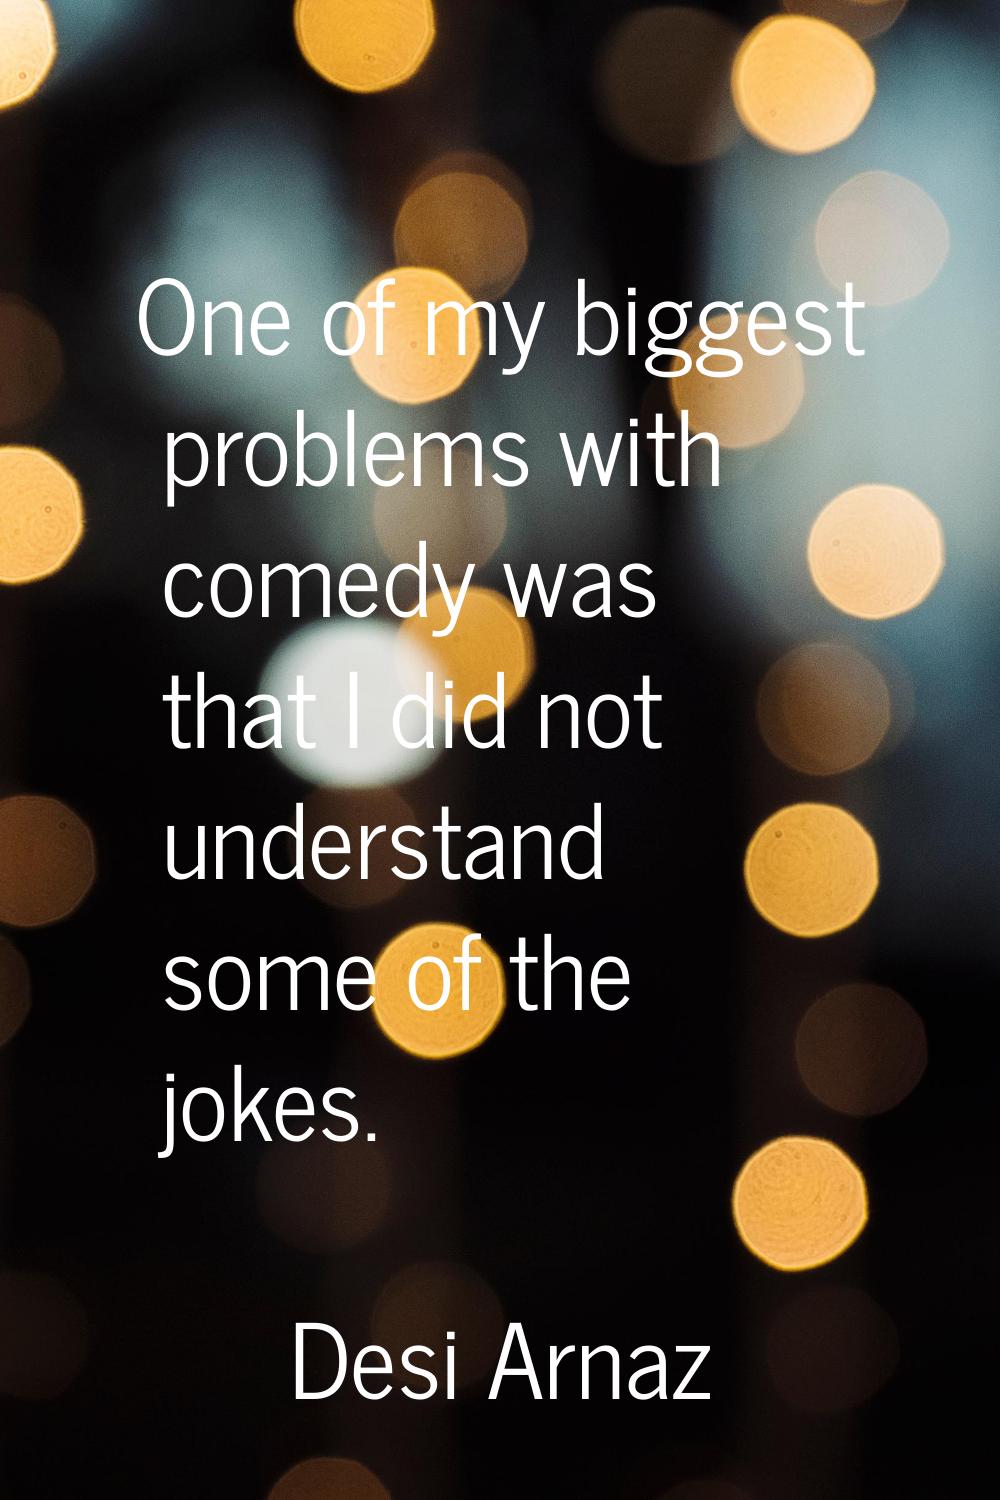 One of my biggest problems with comedy was that I did not understand some of the jokes.